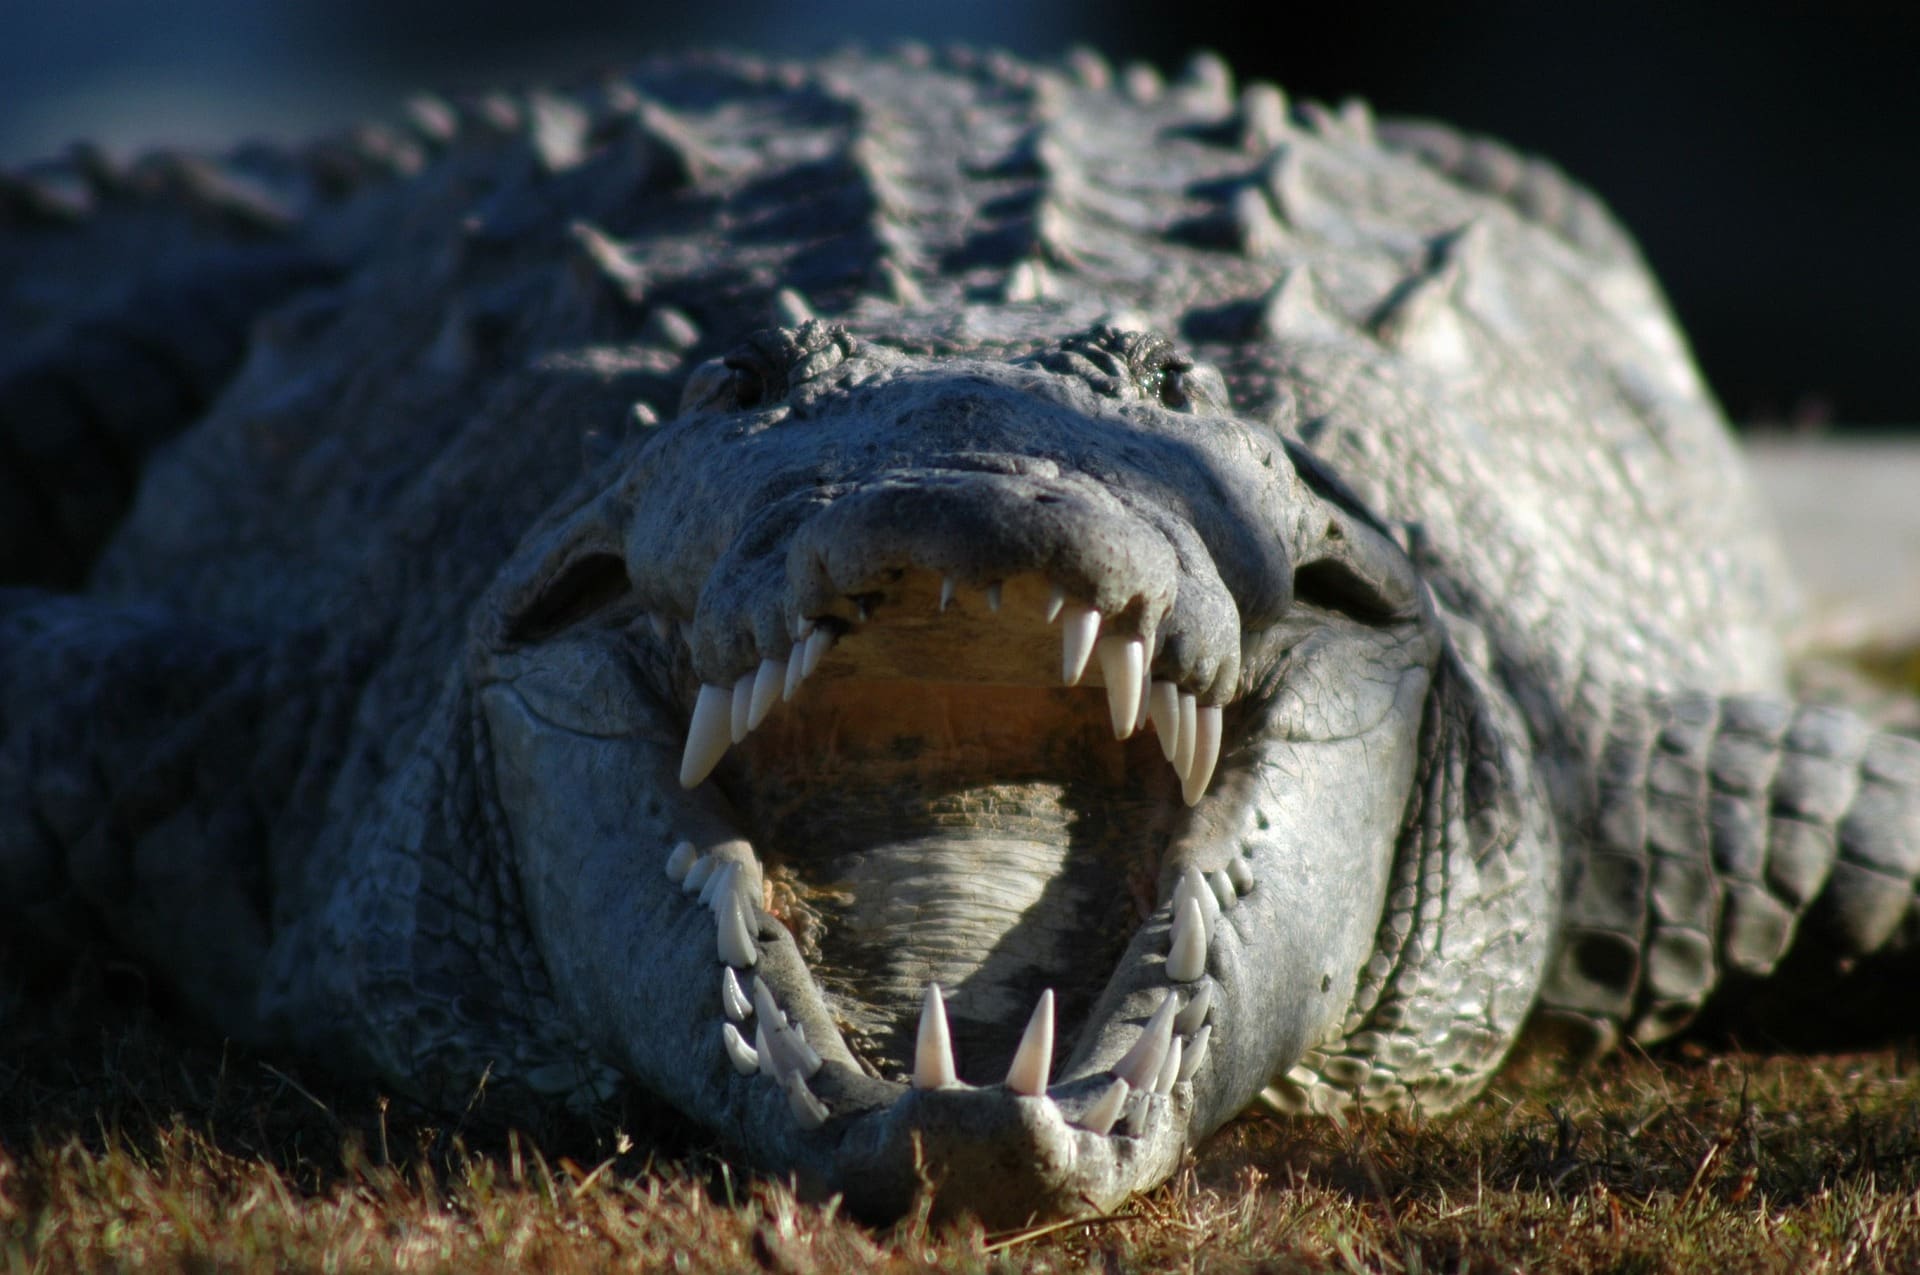 10-year-old boy snatched from boat by crocodile